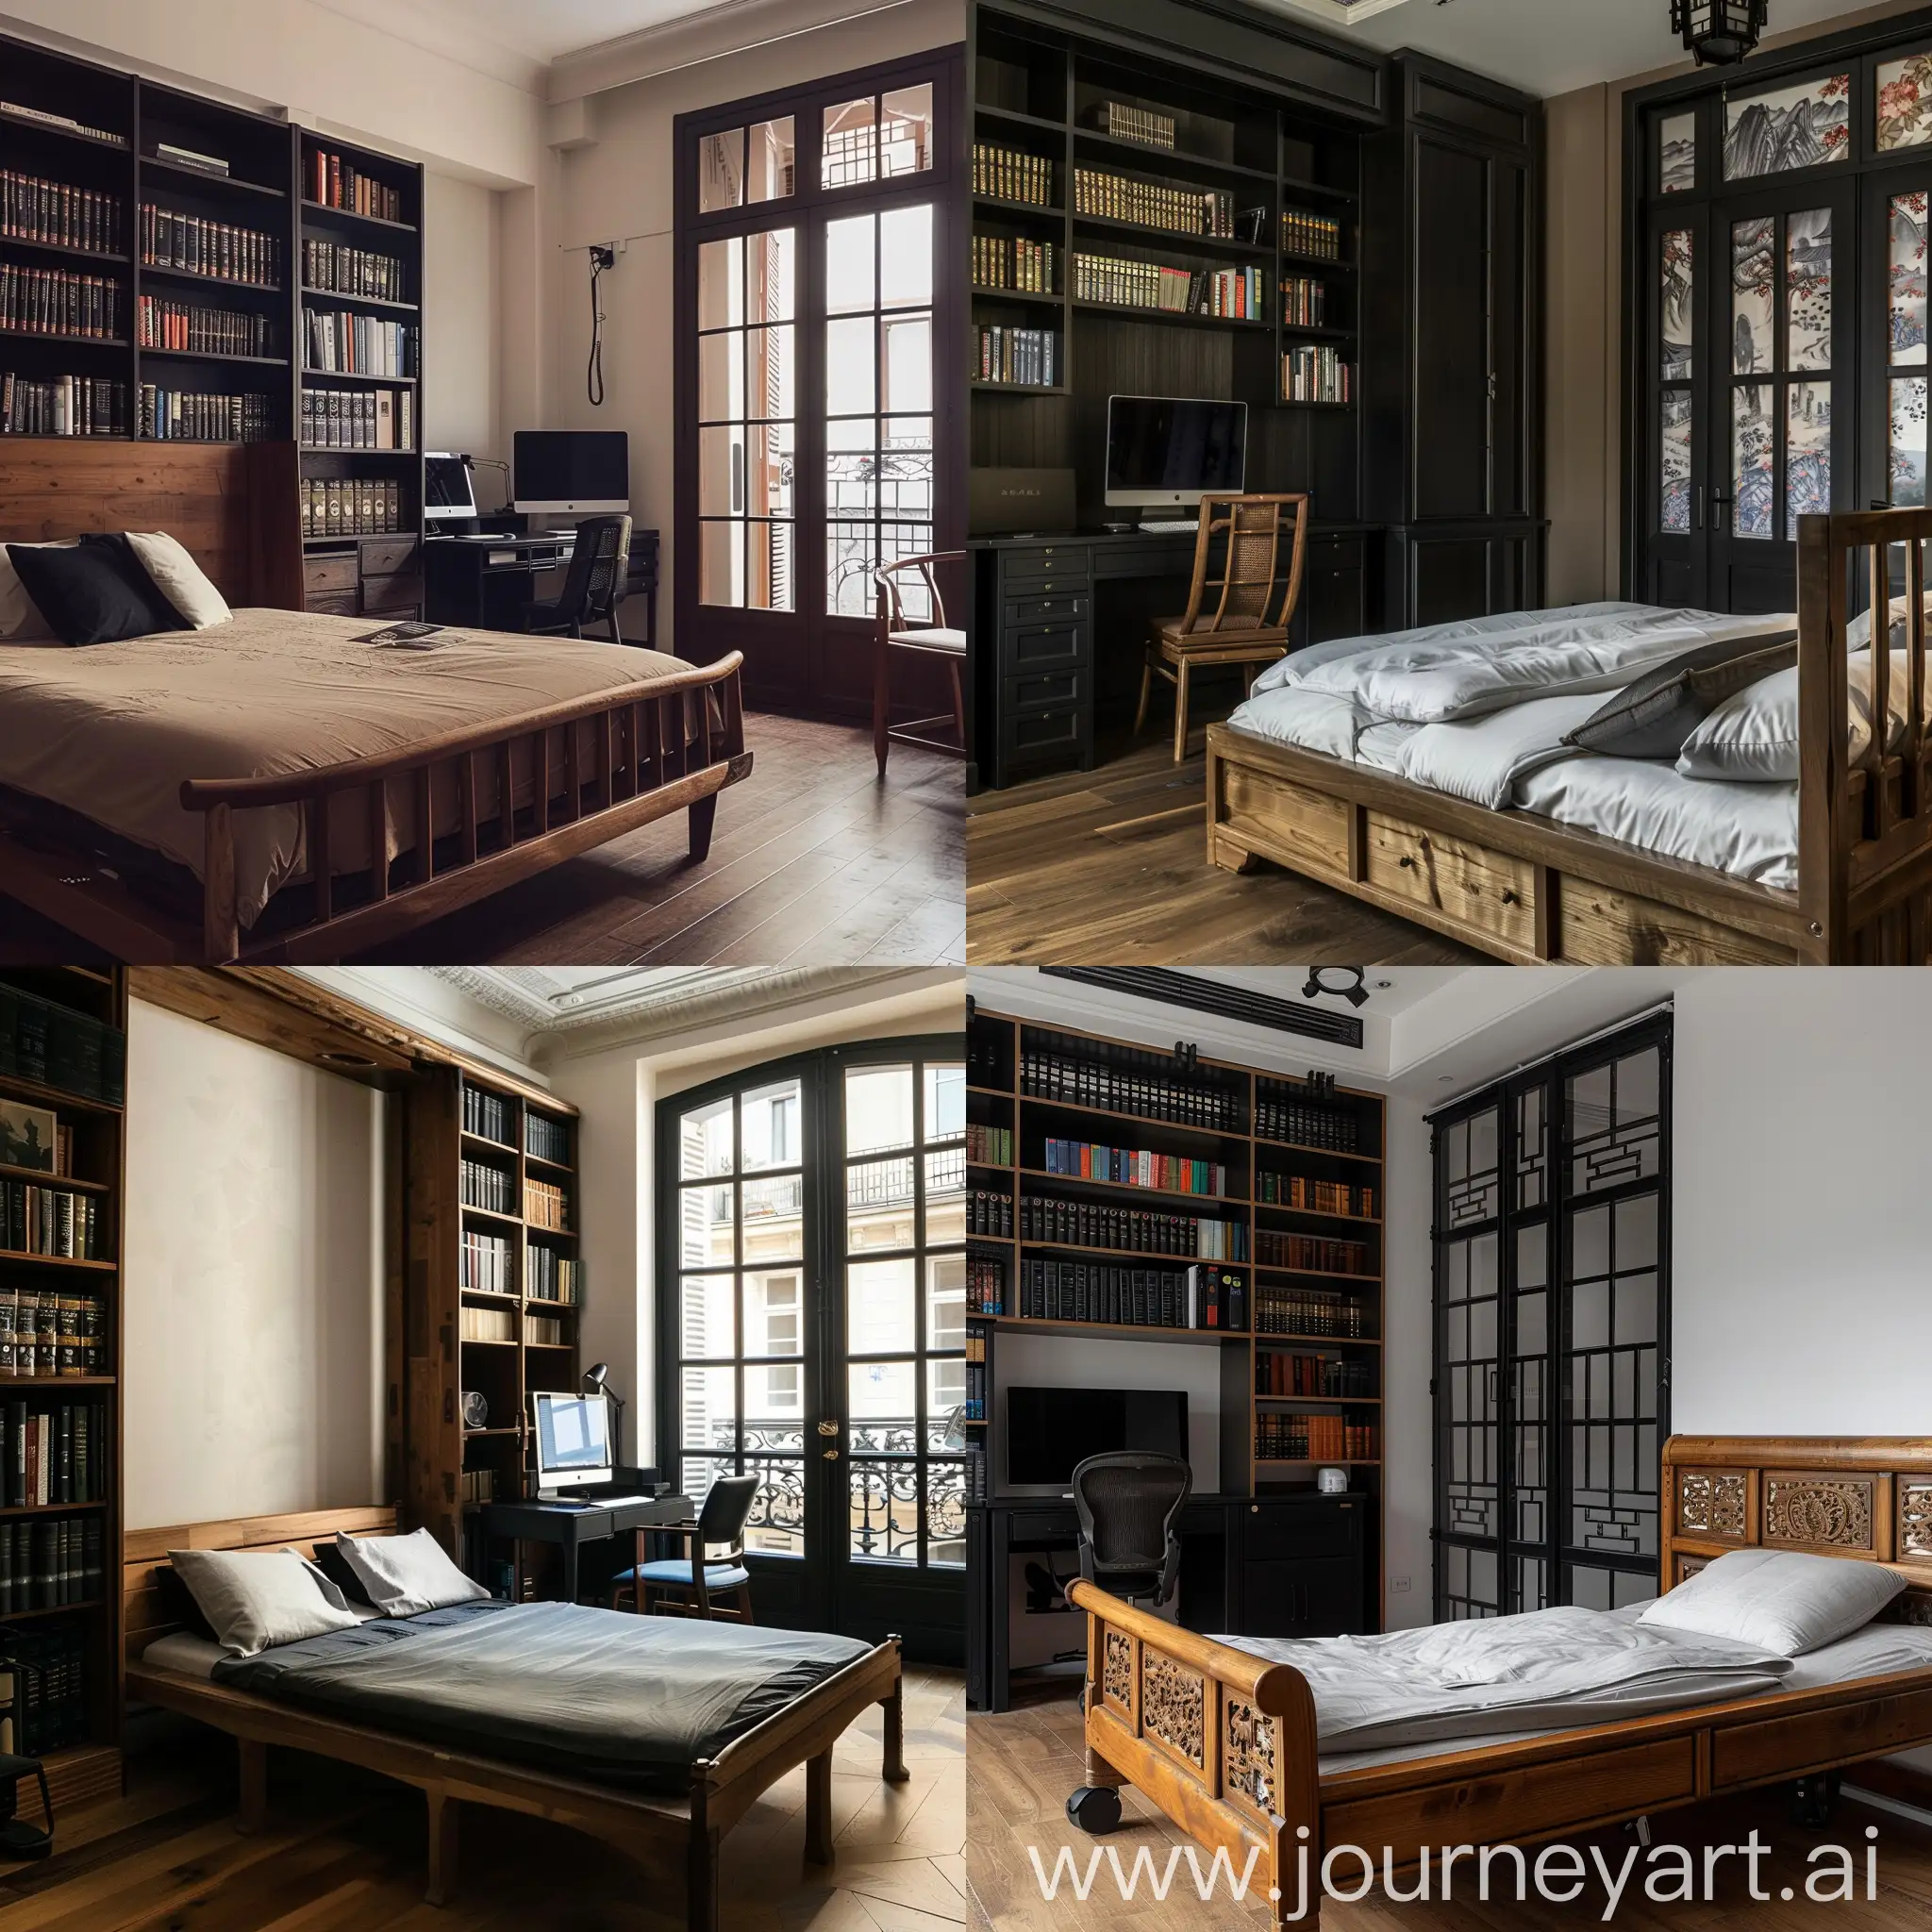 A bed room with minimal wood bed against the wall, dark book shelve next to at and infeon of the bed black Chinese desk and monitor on it, a chair behind desk facing the wall, the bed has big French door